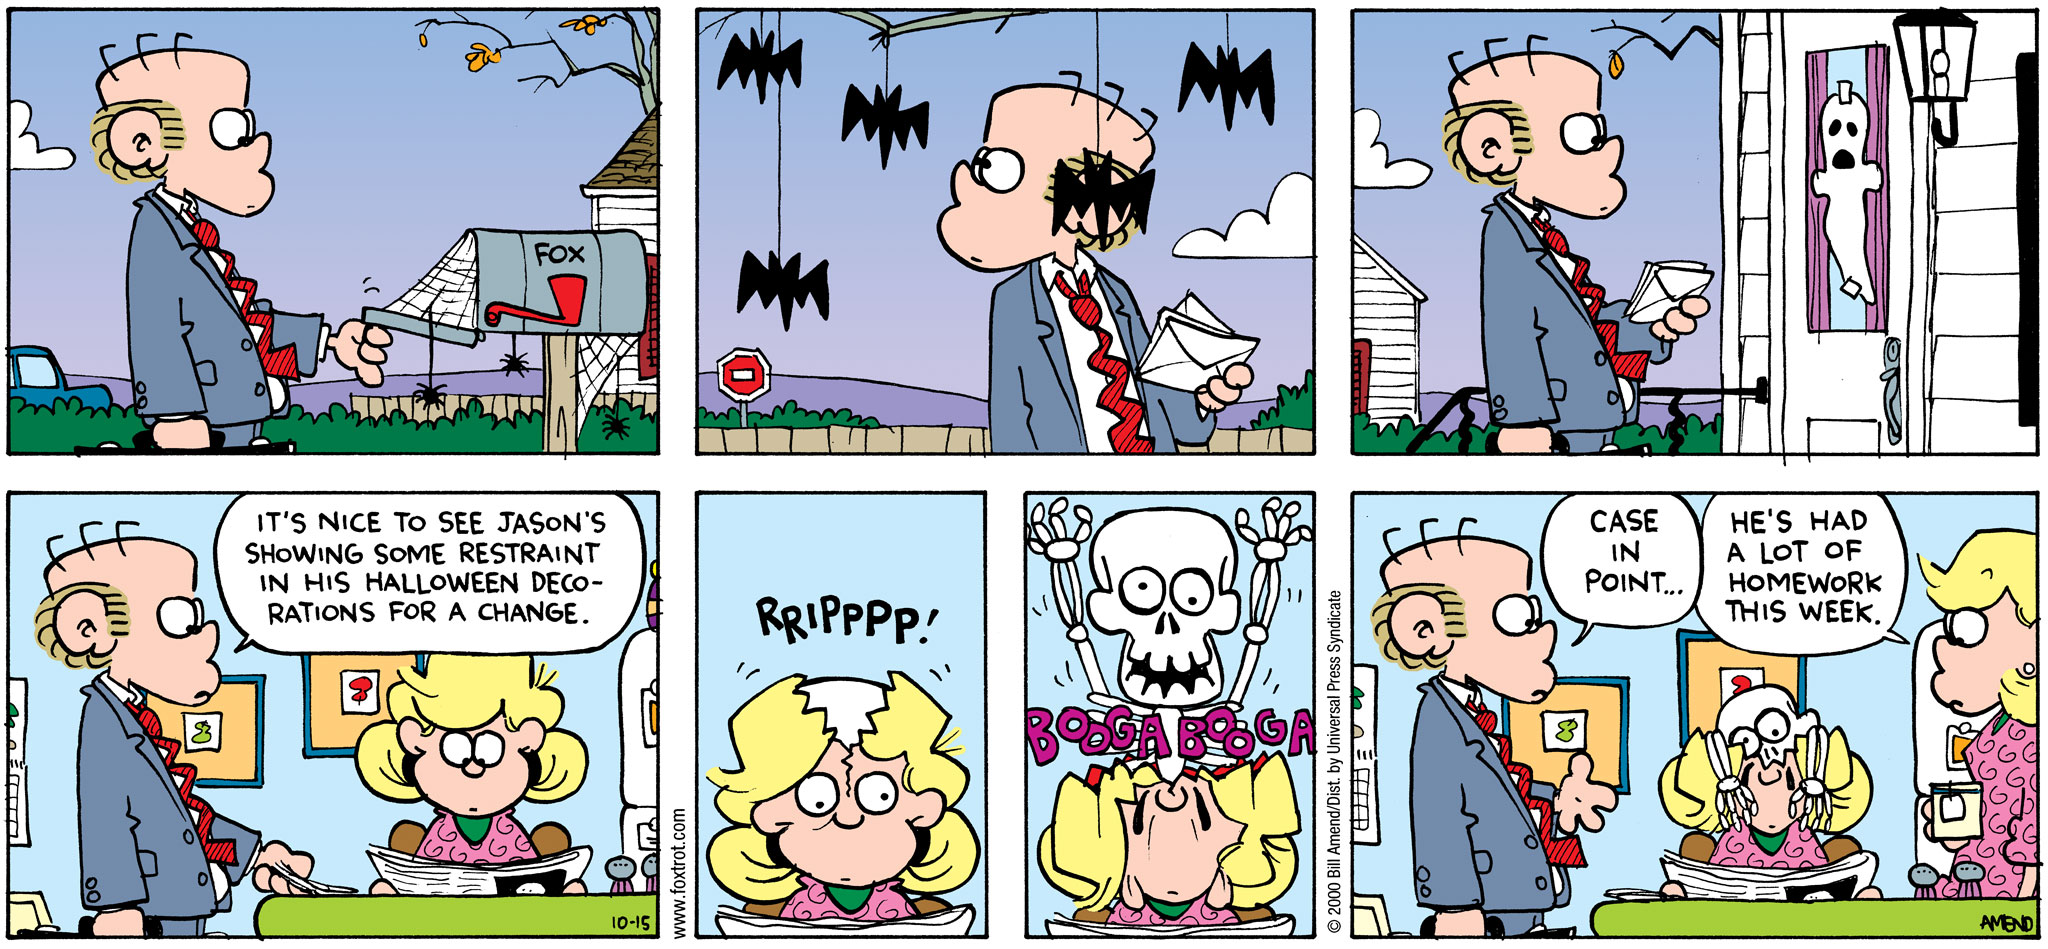 FoxTrot comic strip by Bill Amend - Published October 15, 2000 - Roger Fox: It's nice to see Jason's showing some restraint in his Halloween decorations for a change. Case in point... Andy Fox: He's had a lot of homework this week.